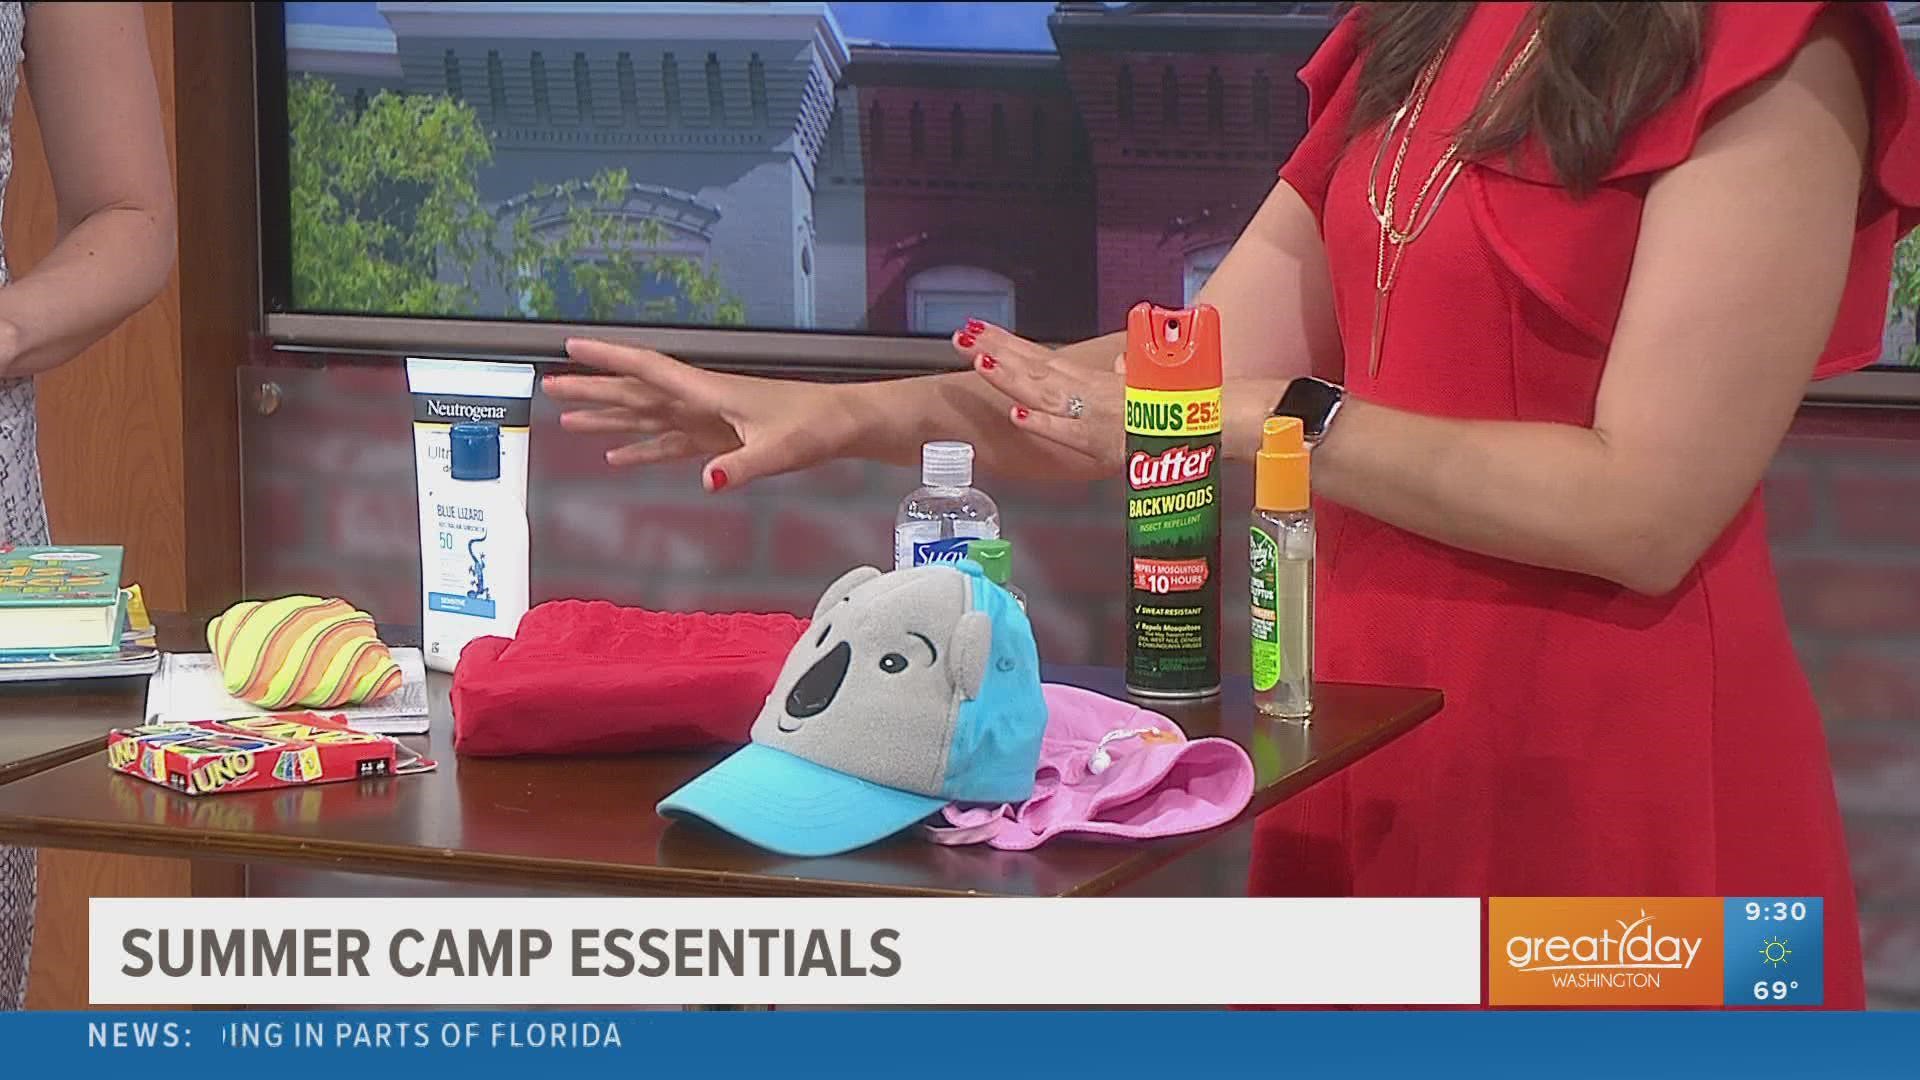 Courtney Whittington, Founder and Director of DC Area Moms, shares the perfect packing list for sending your kids off to summer camp.